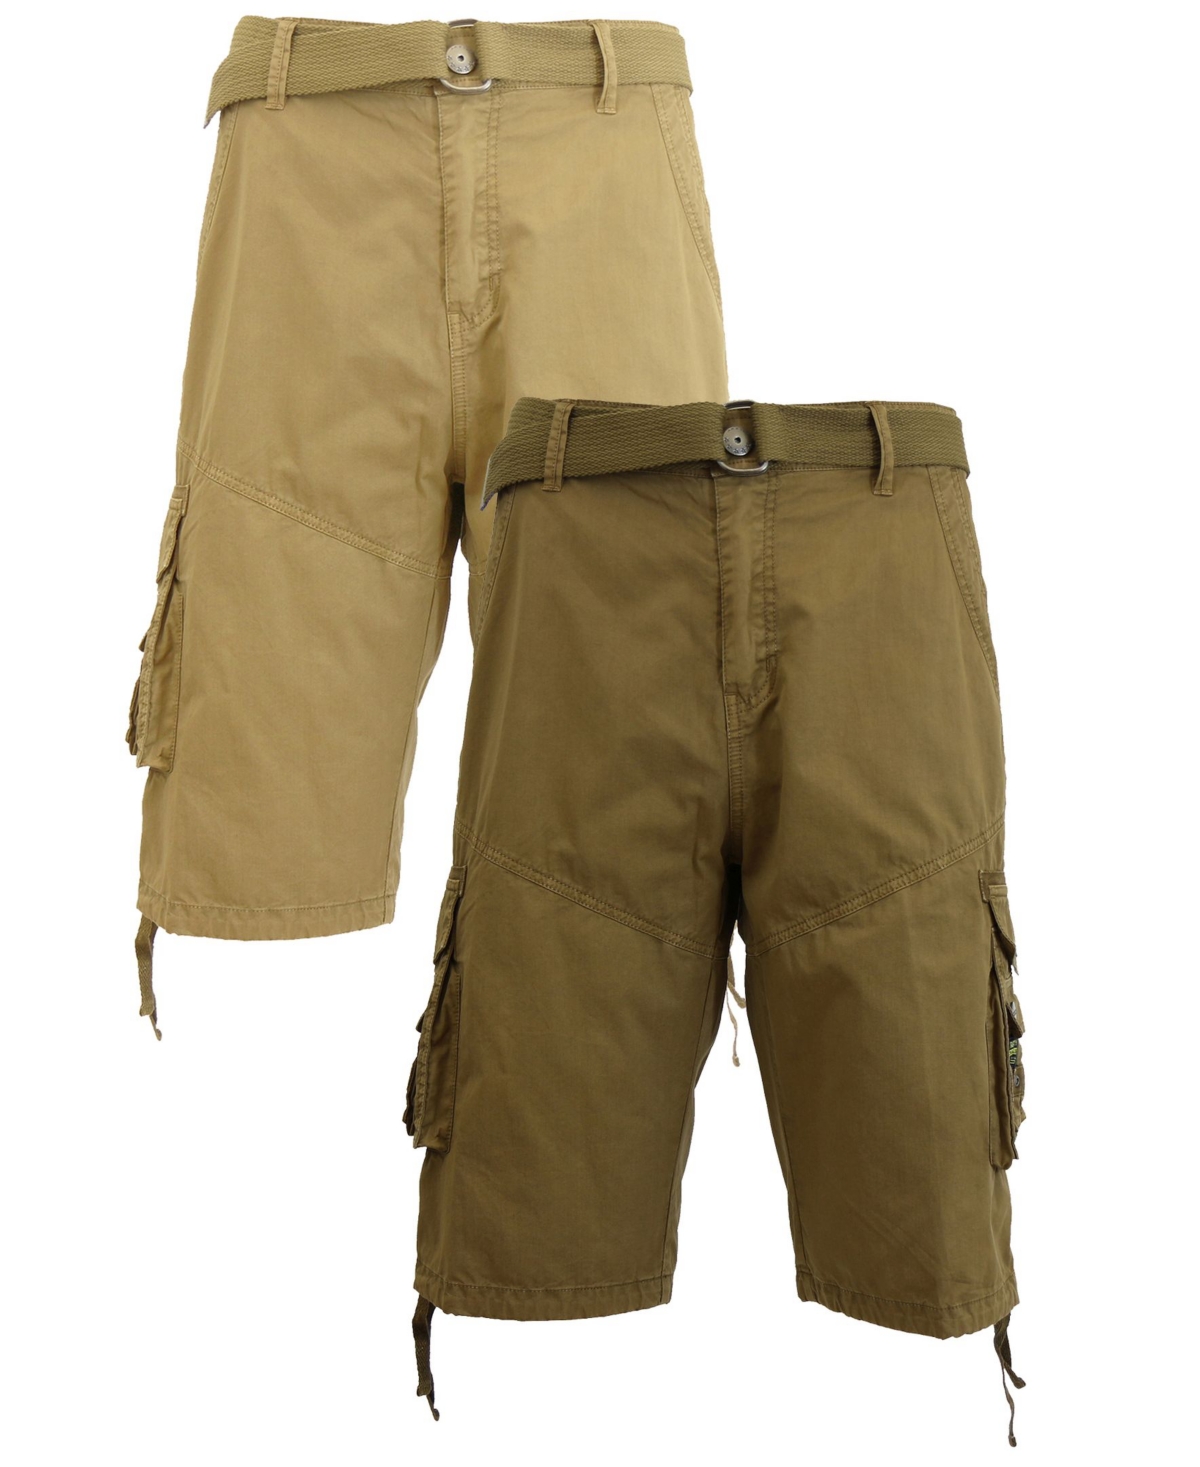 Galaxy By Harvic Men's Belted Cargo Shorts With Twill Flat Front Washed Utility Pockets, Pack Of 2 In Khaki And Timber